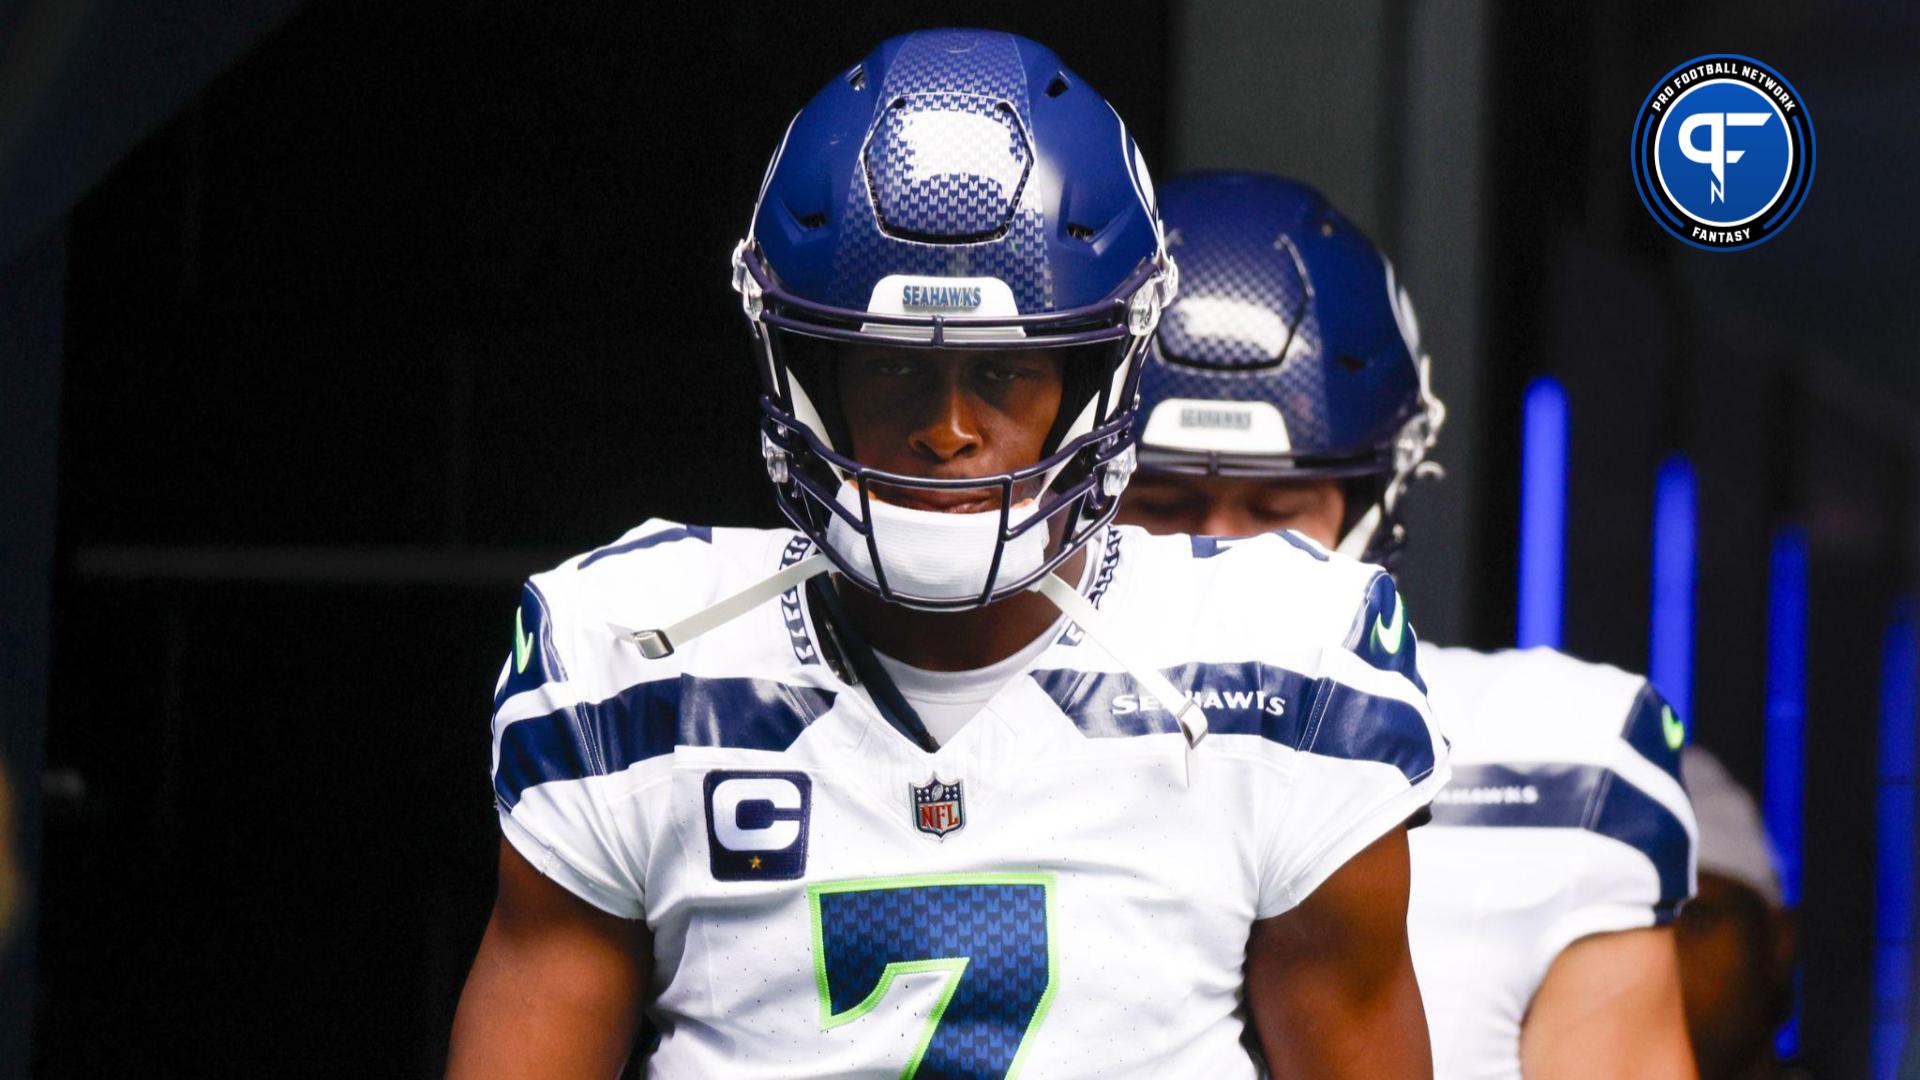 Seahawks Reveal Uniform Combo For Week 2 at Lions